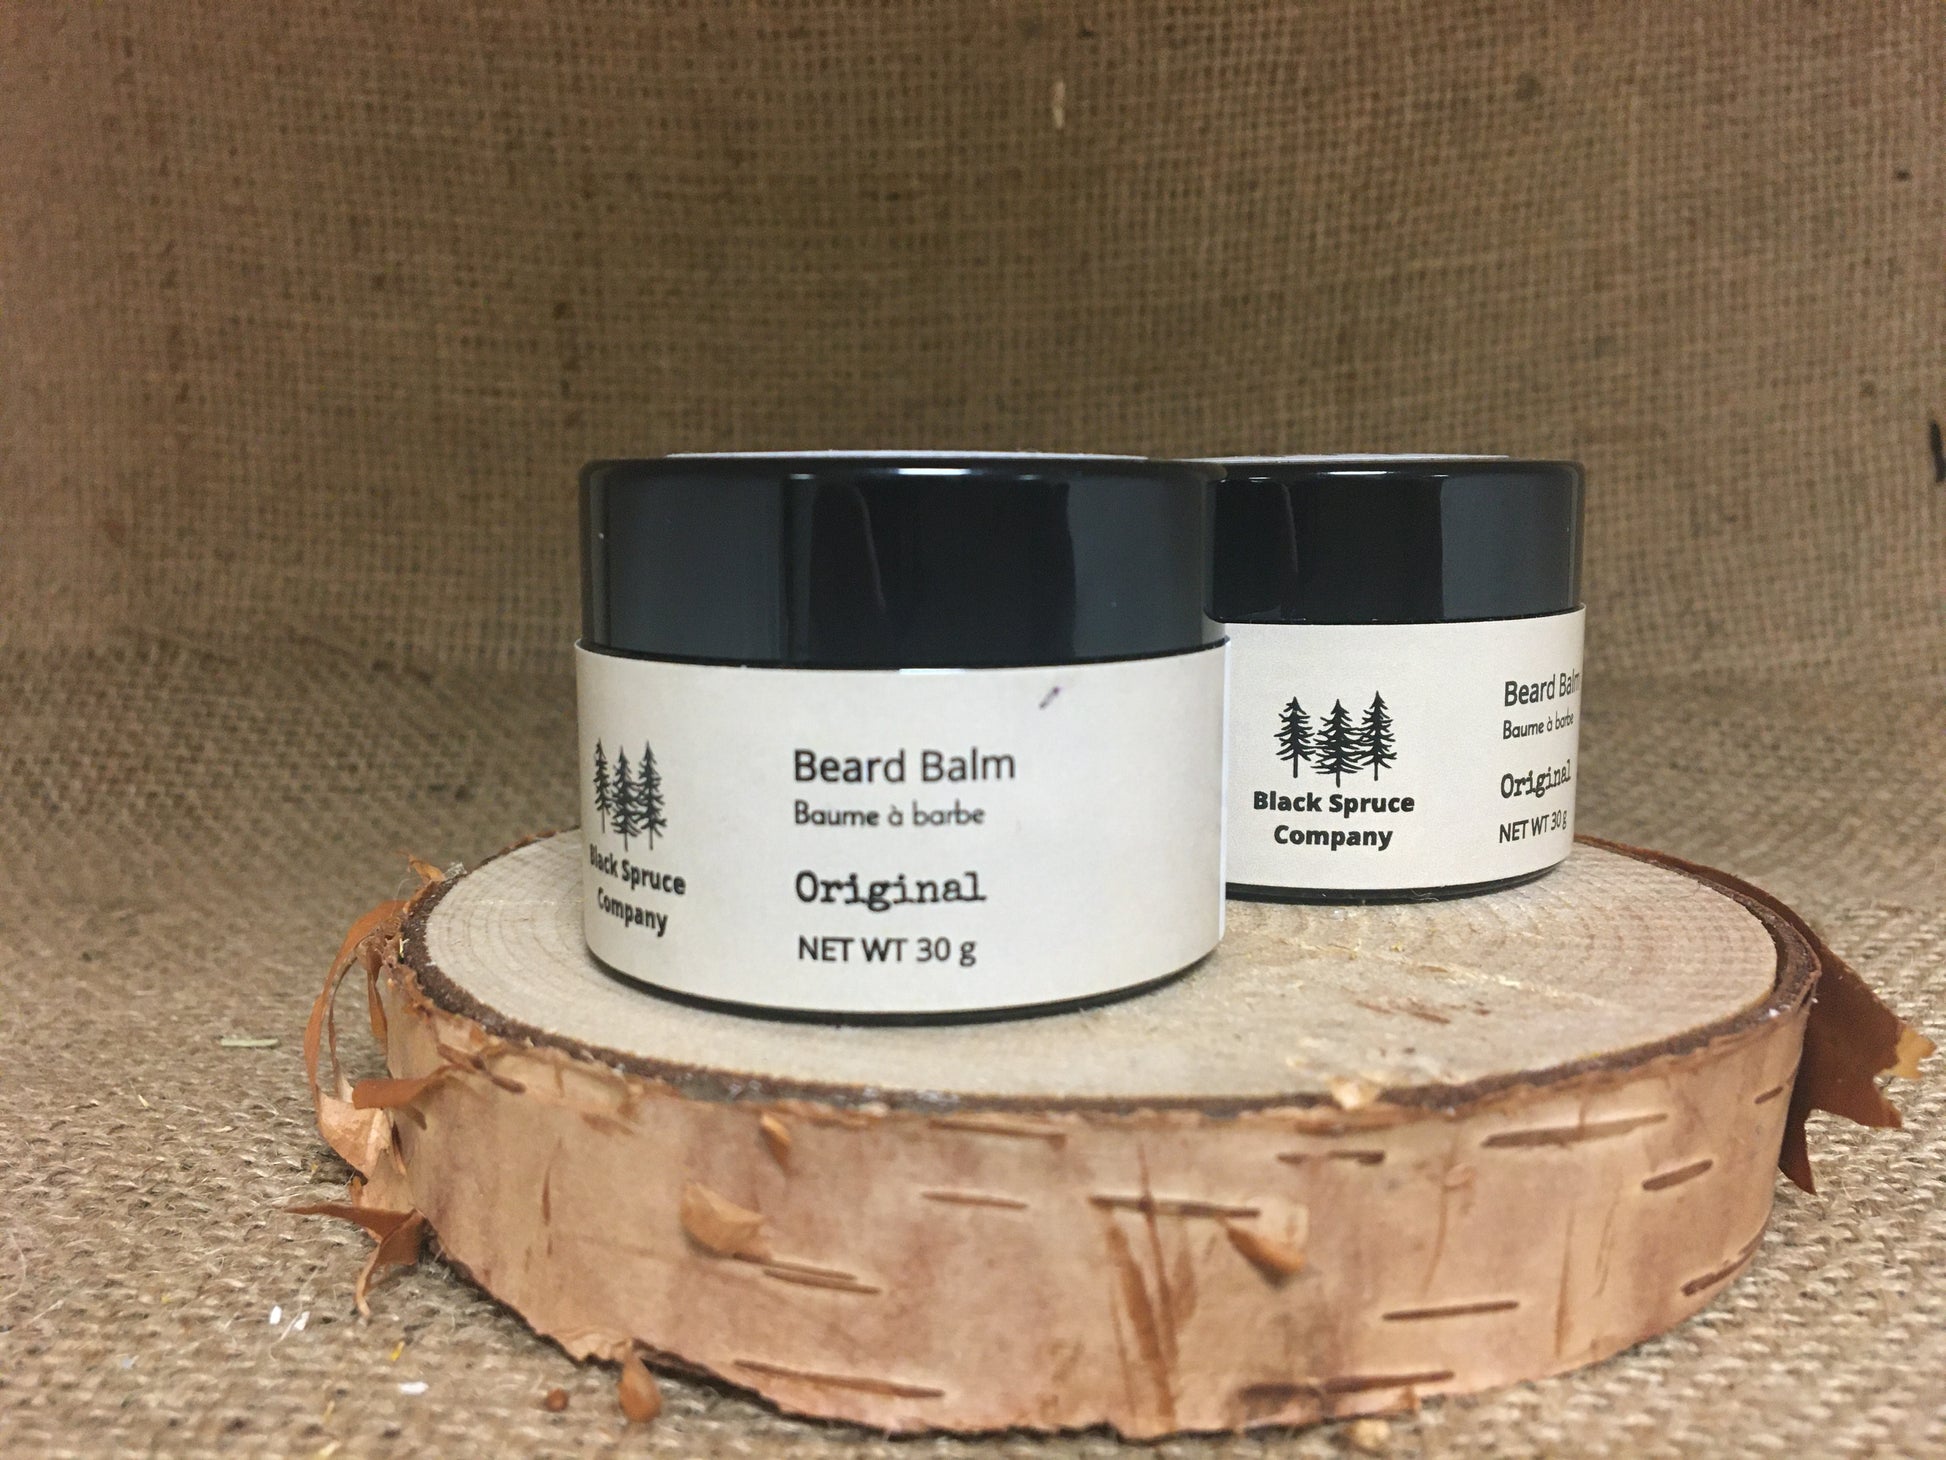 Beard Balm Original one in front of the other